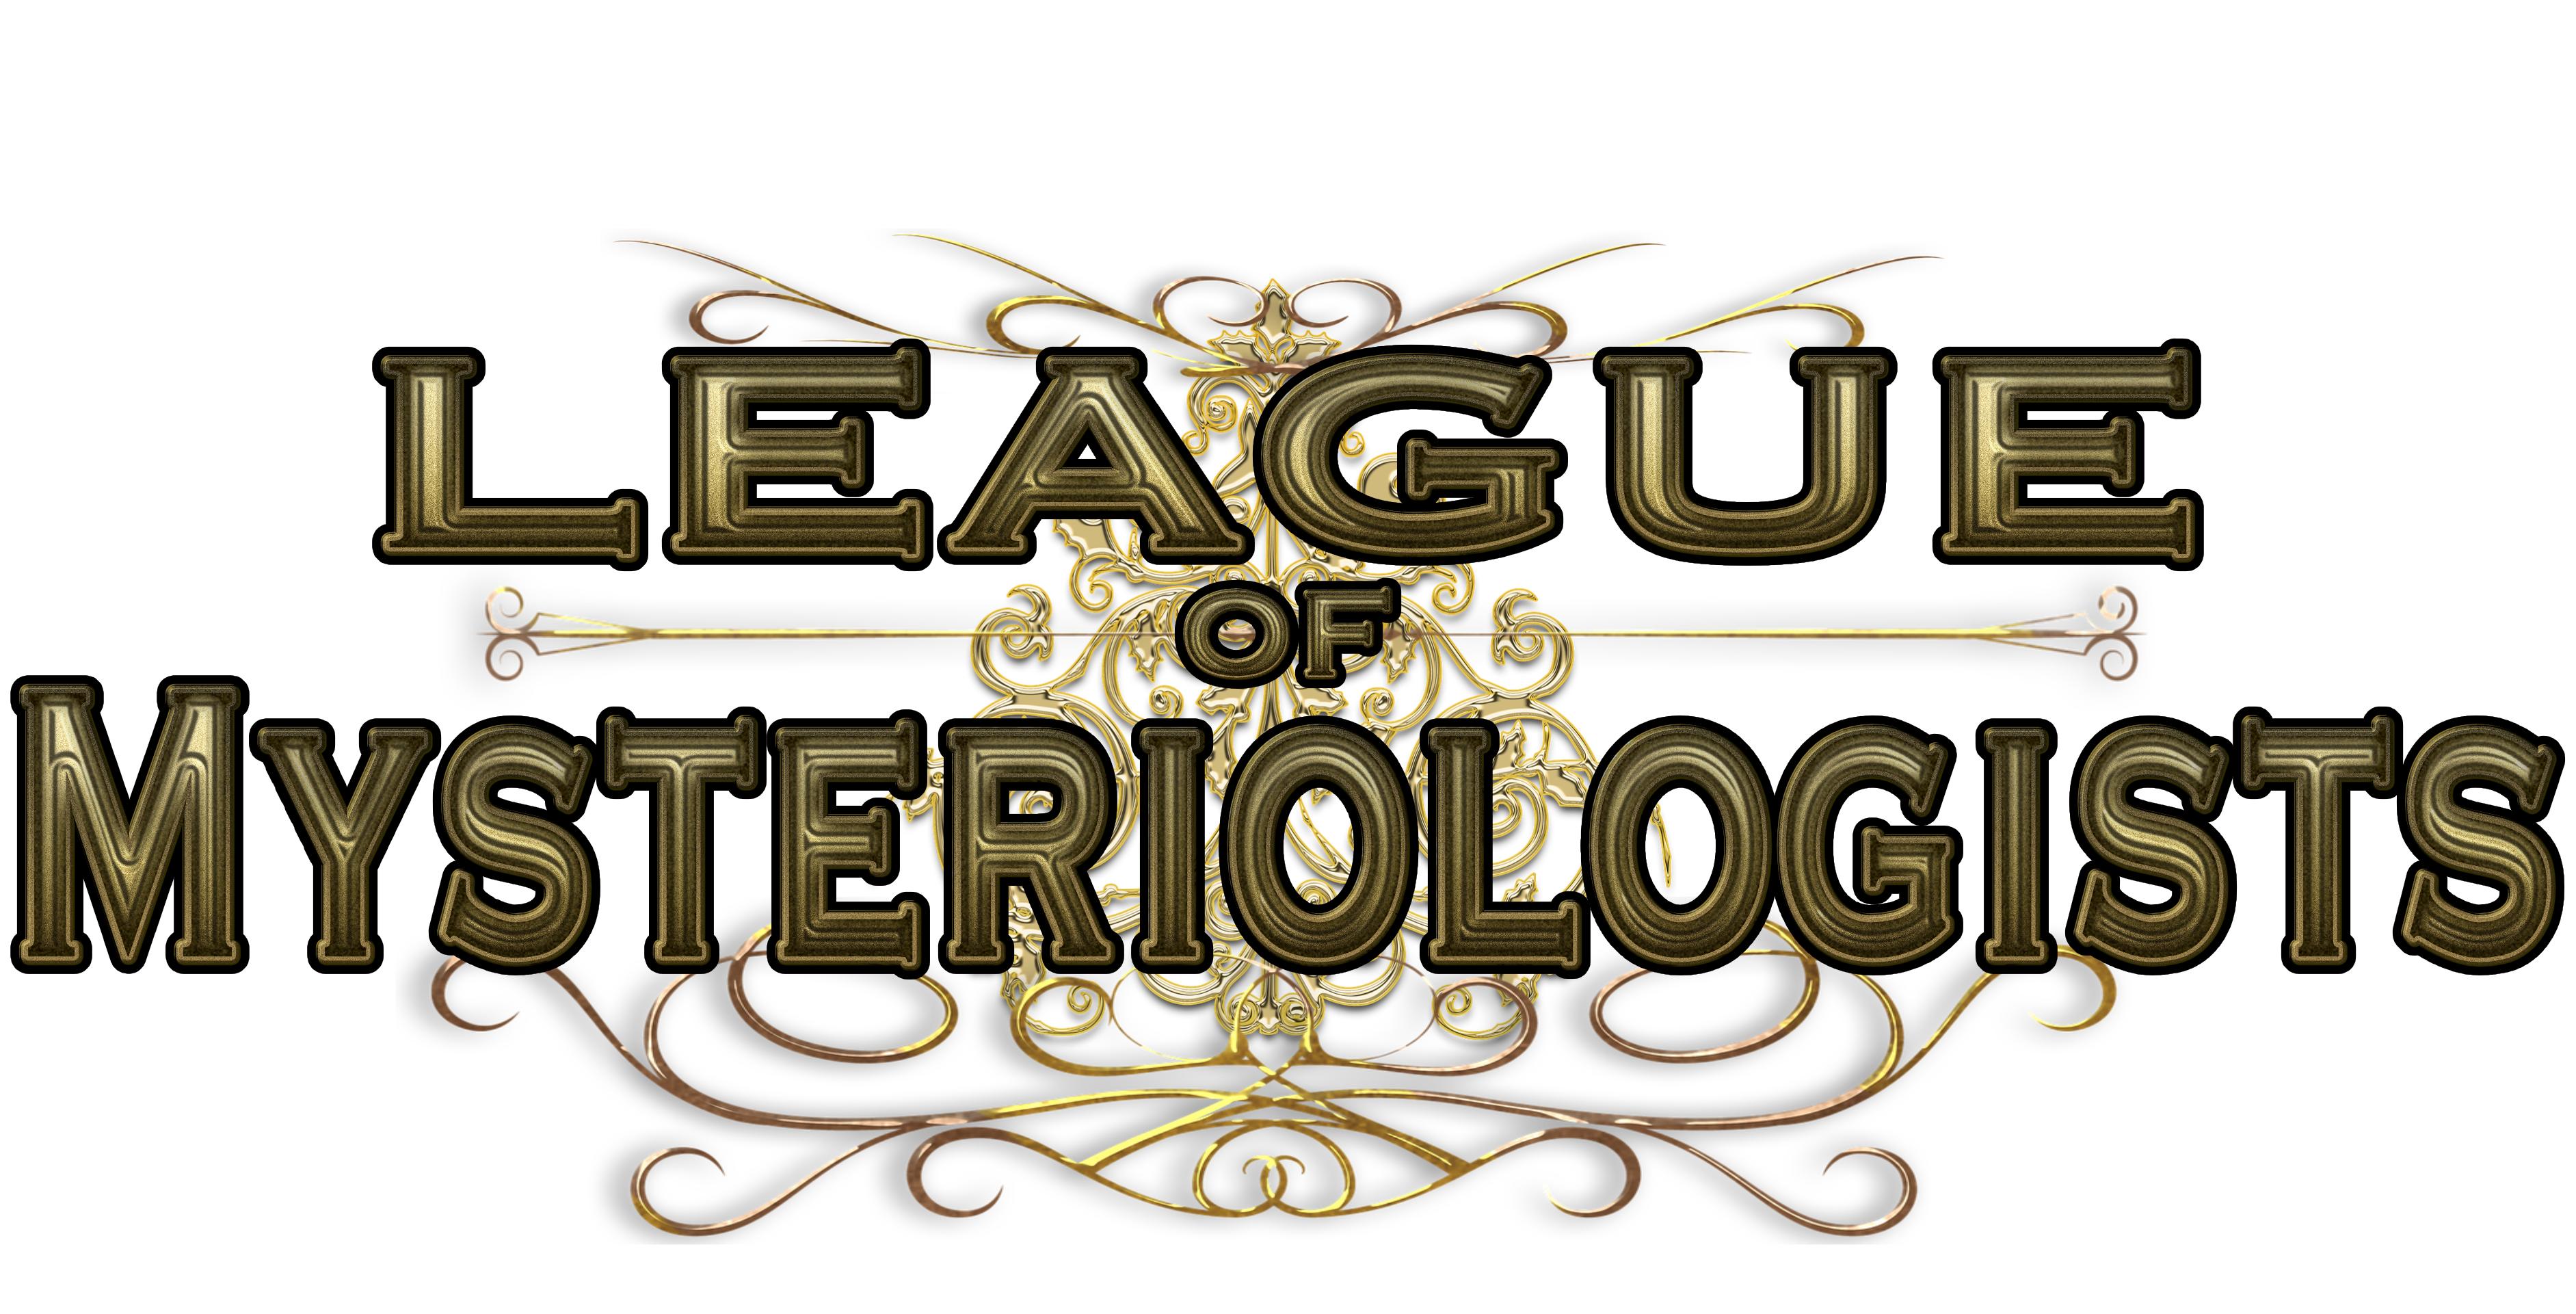 The League of Mysteriologists